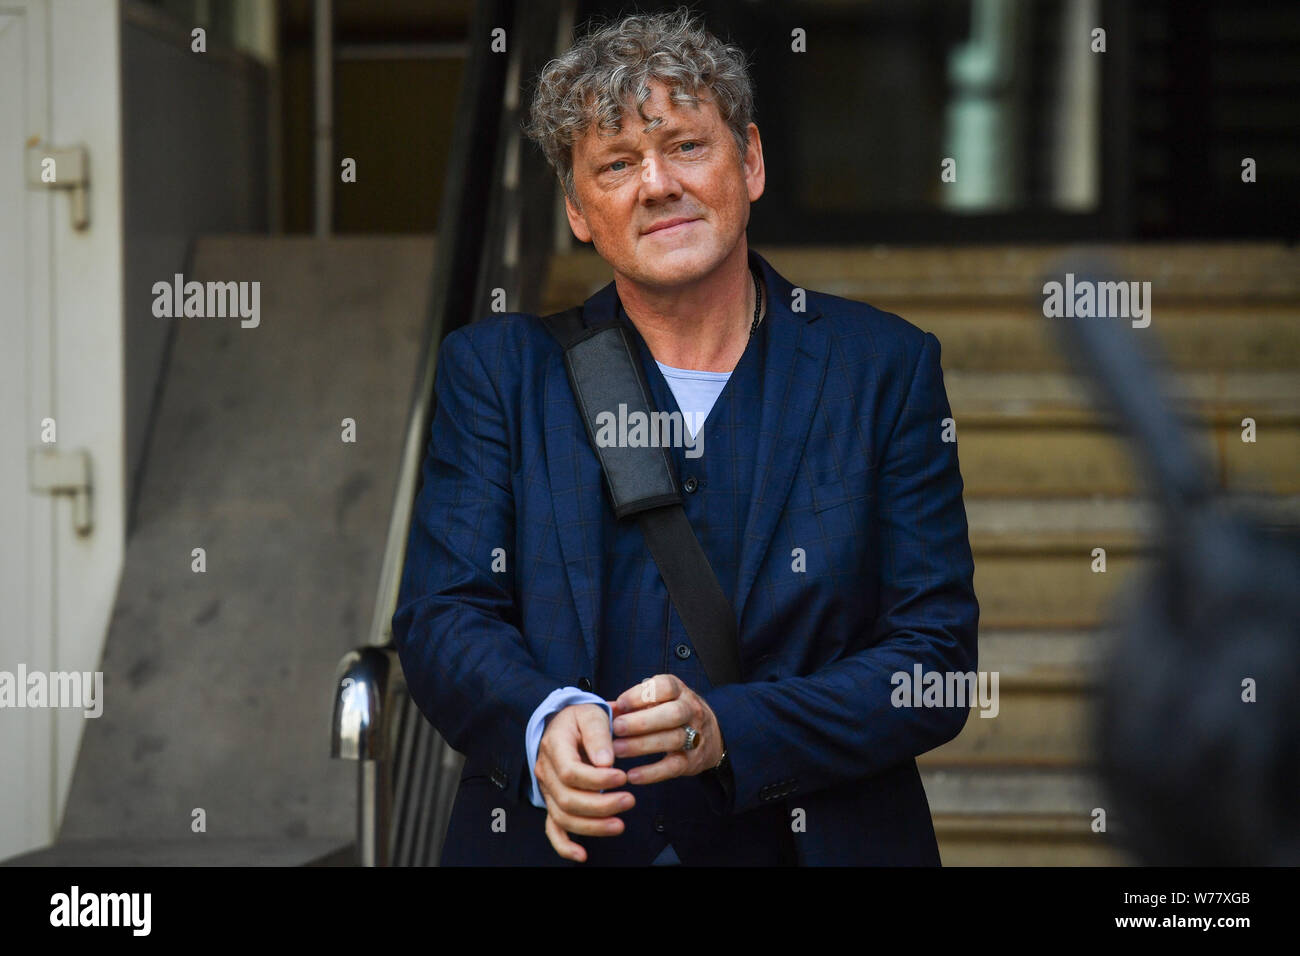 Mark Jordan High Resolution Stock Photography and Images - Alamy